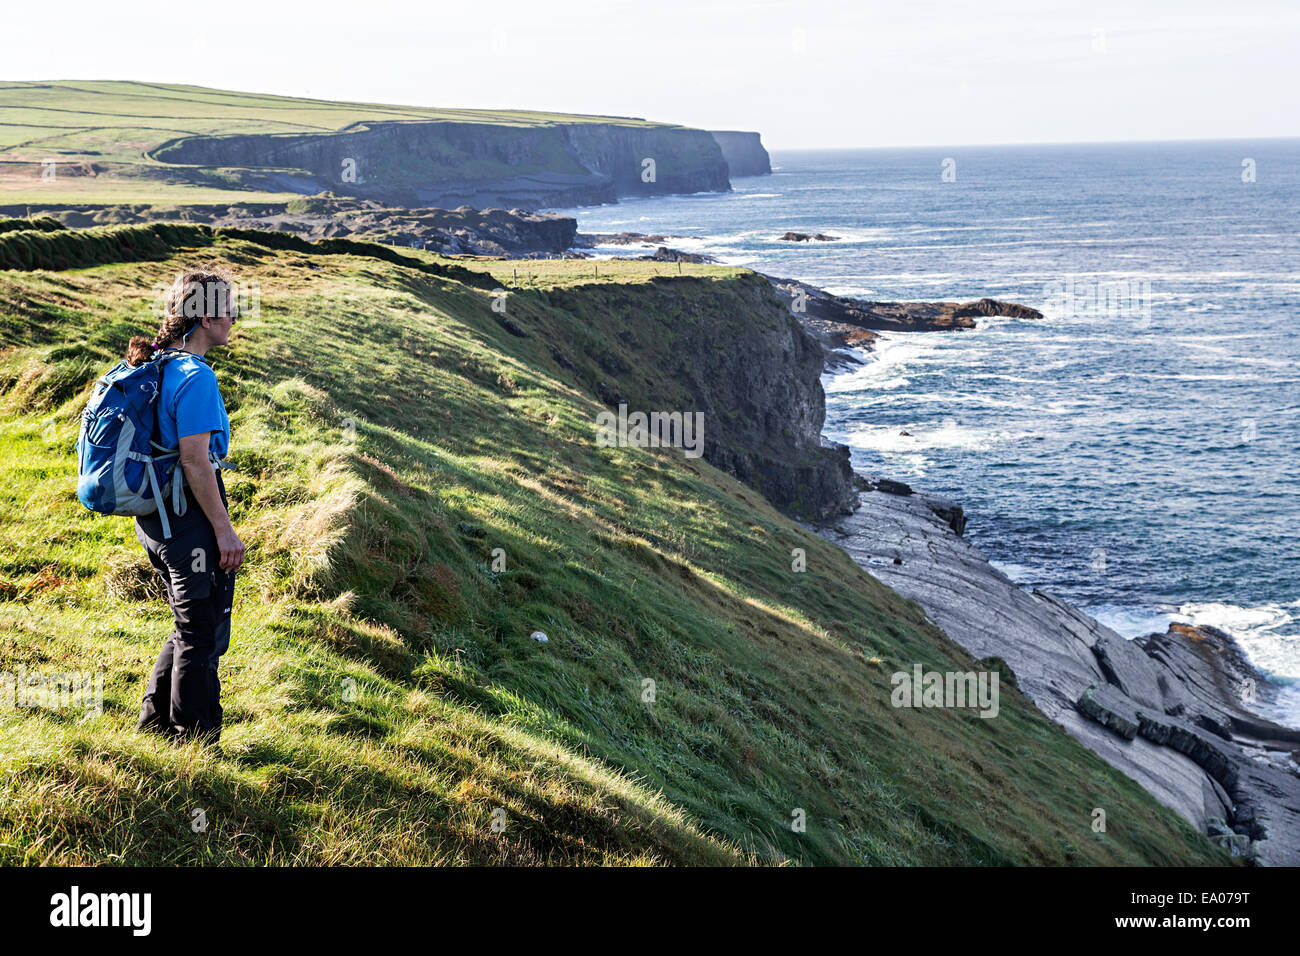 Female hiker on the Loop Head section of west coast, County Clare, Ireland Stock Photo